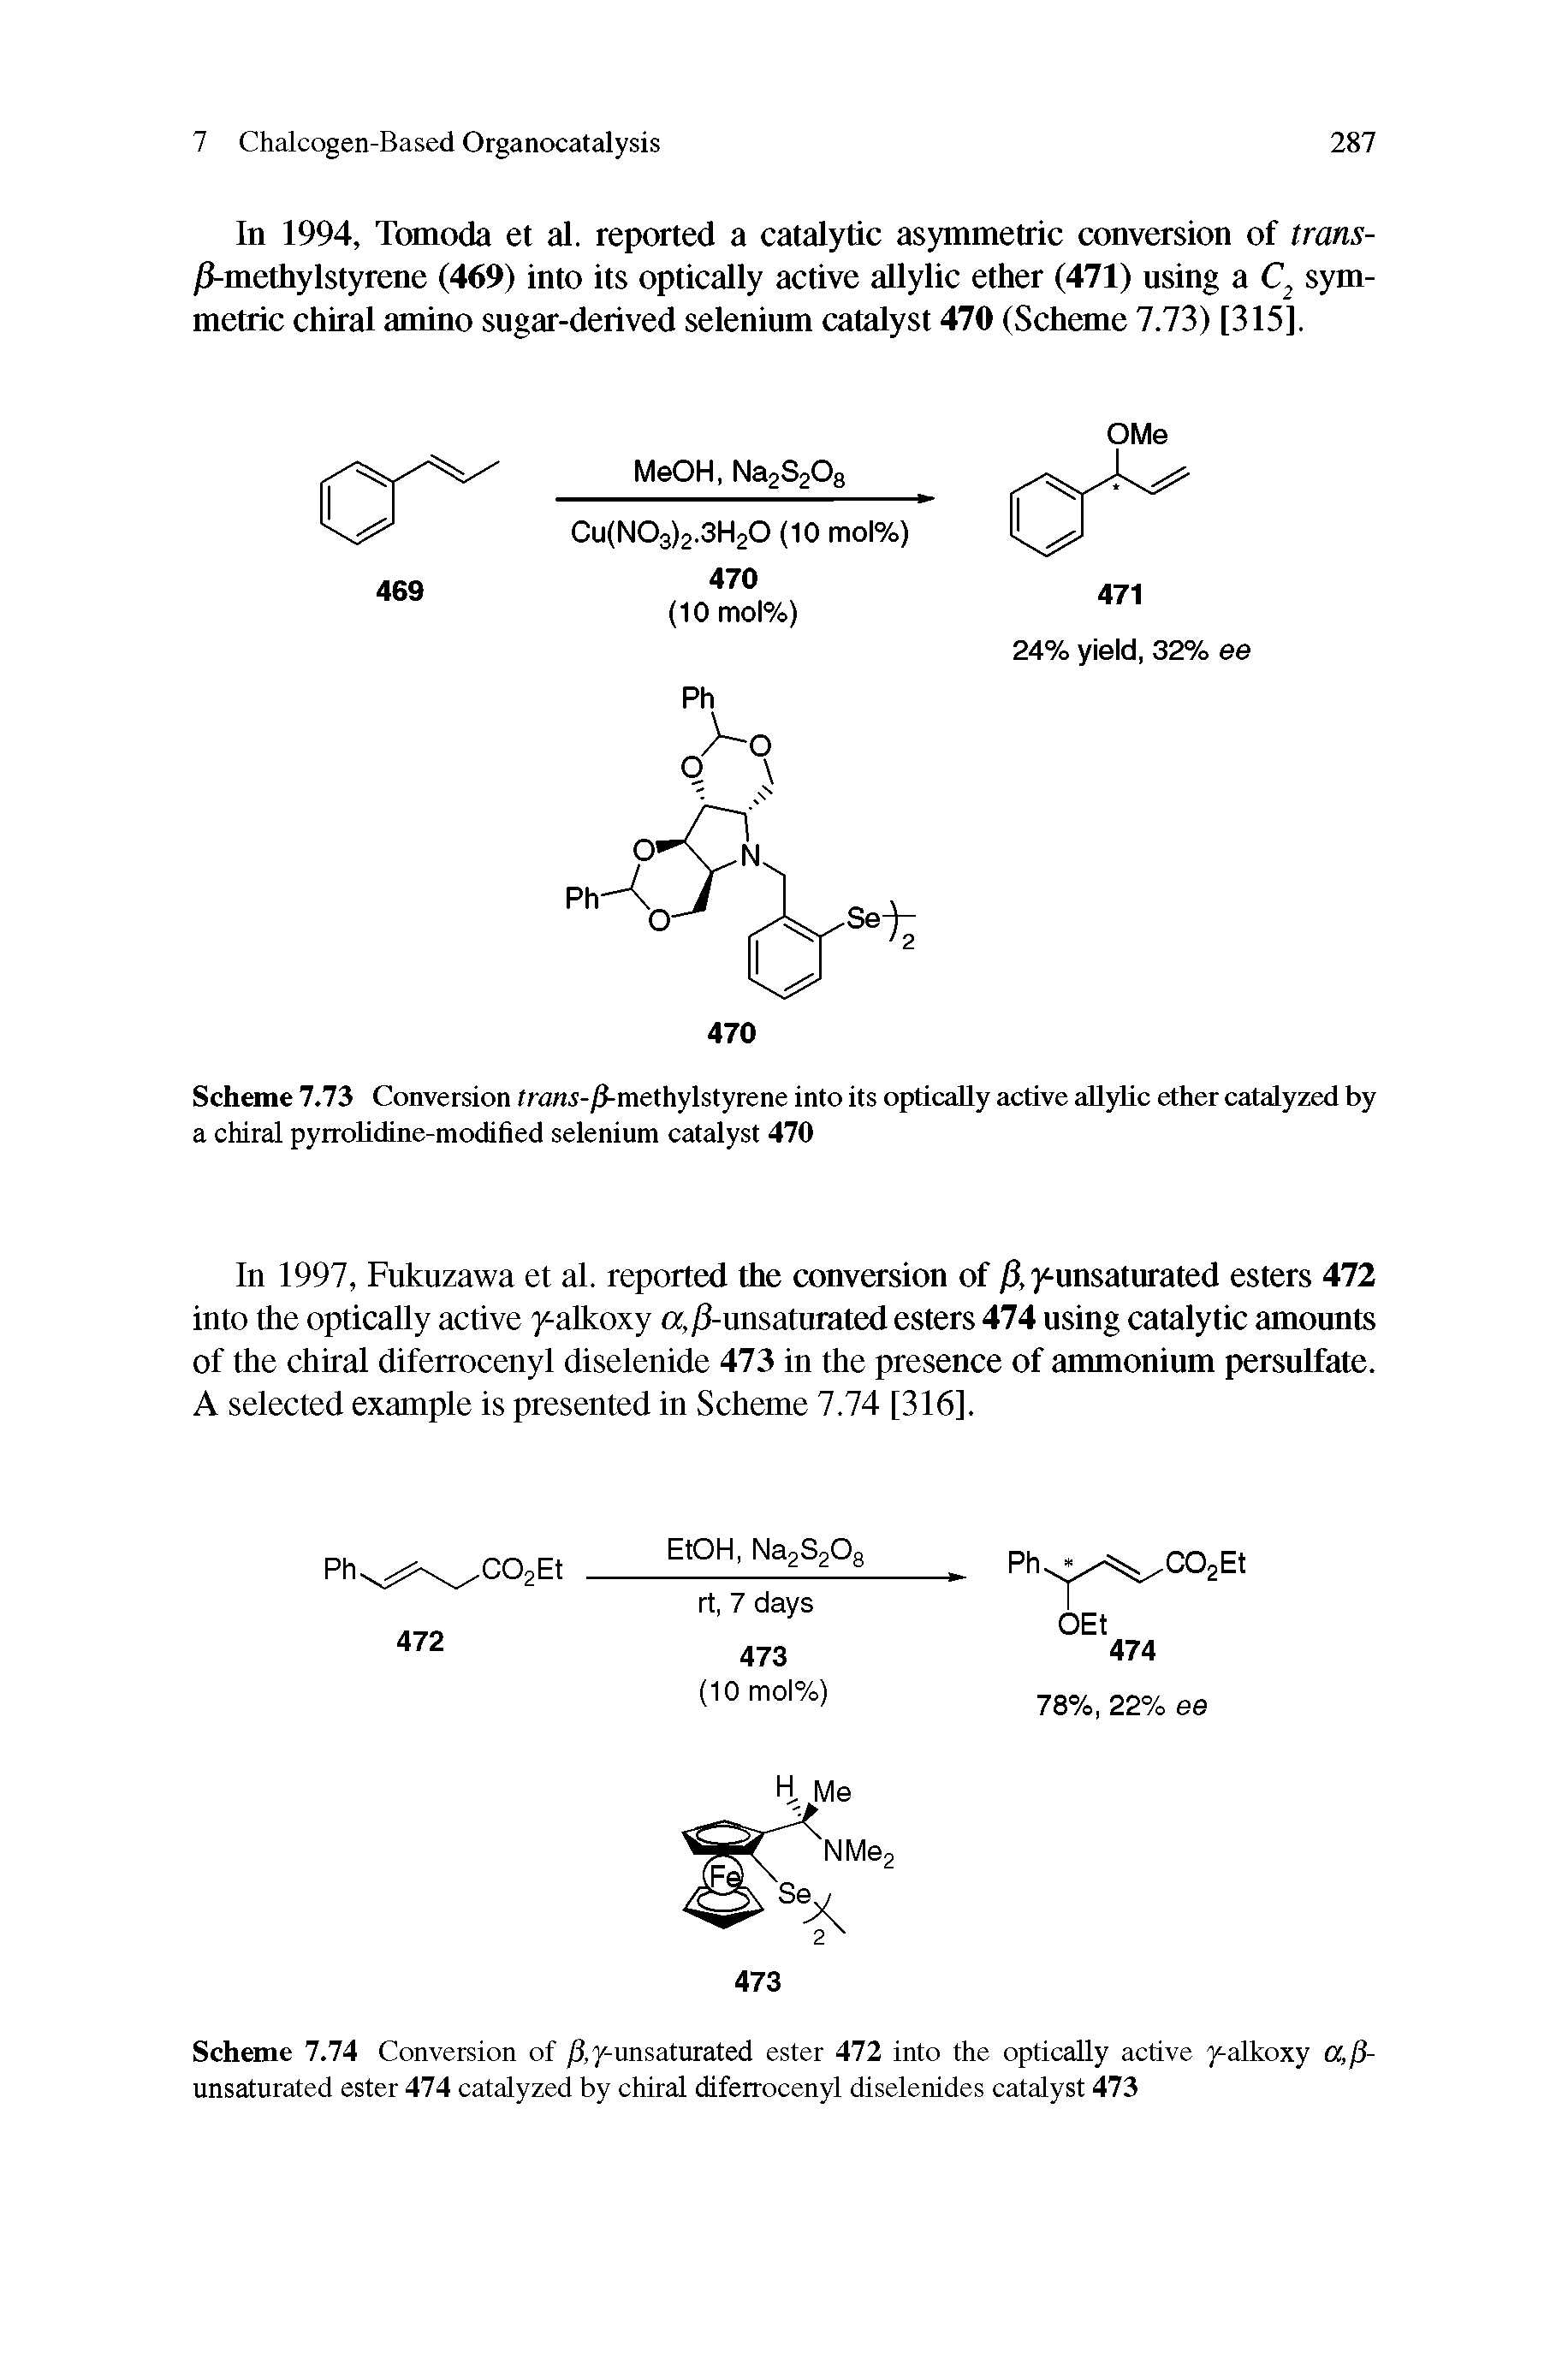 Scheme 7.74 Conversion of /J,y-unsaturated ester 472 into the optically active y-alkoxy a,ji-unsaturated ester 474 catalyzed by chiral diferrocenyl diselenides catalyst 473...